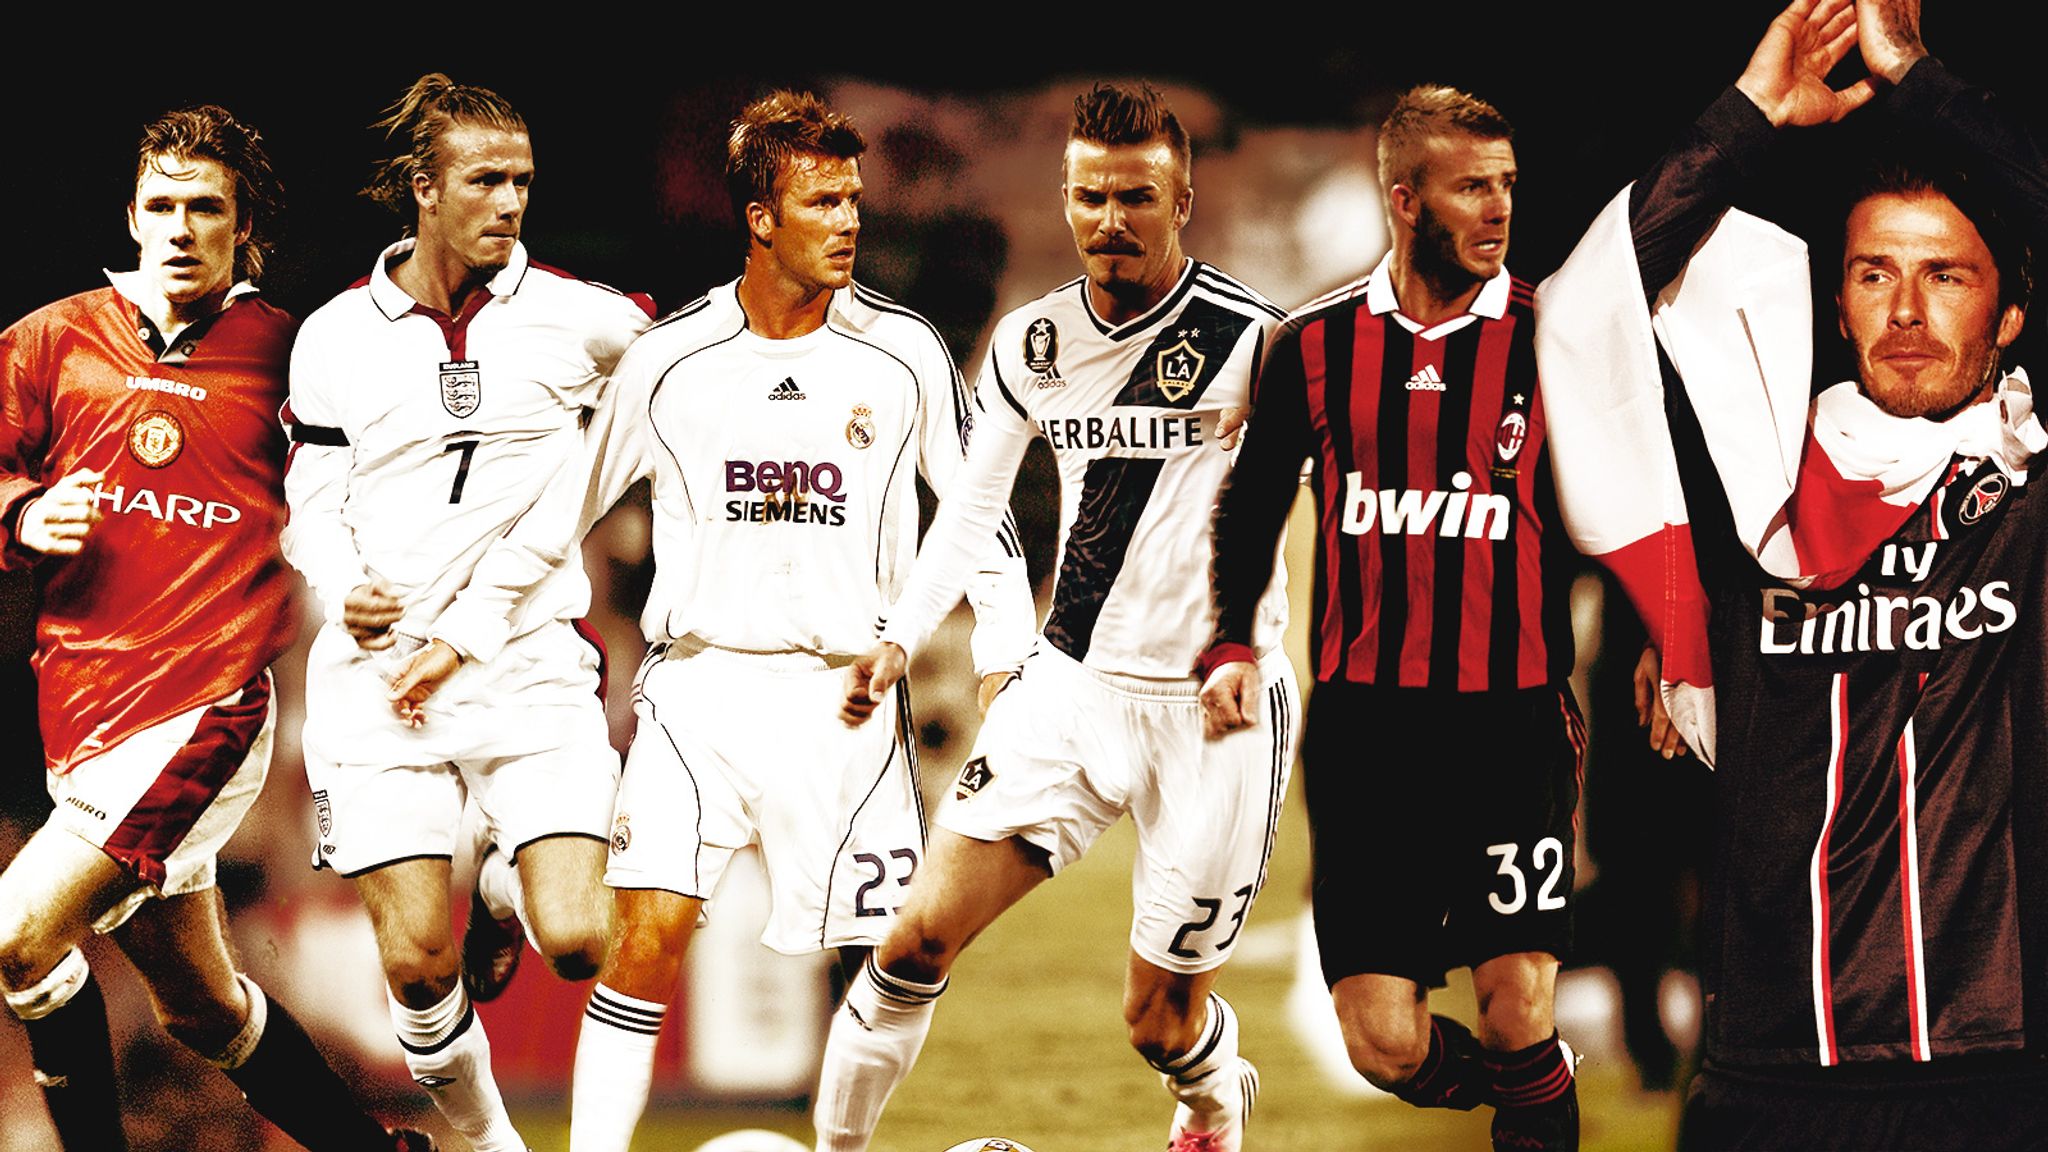 Bwin kit wallpaper for the more recently nostalgic fan : r/ACMilan